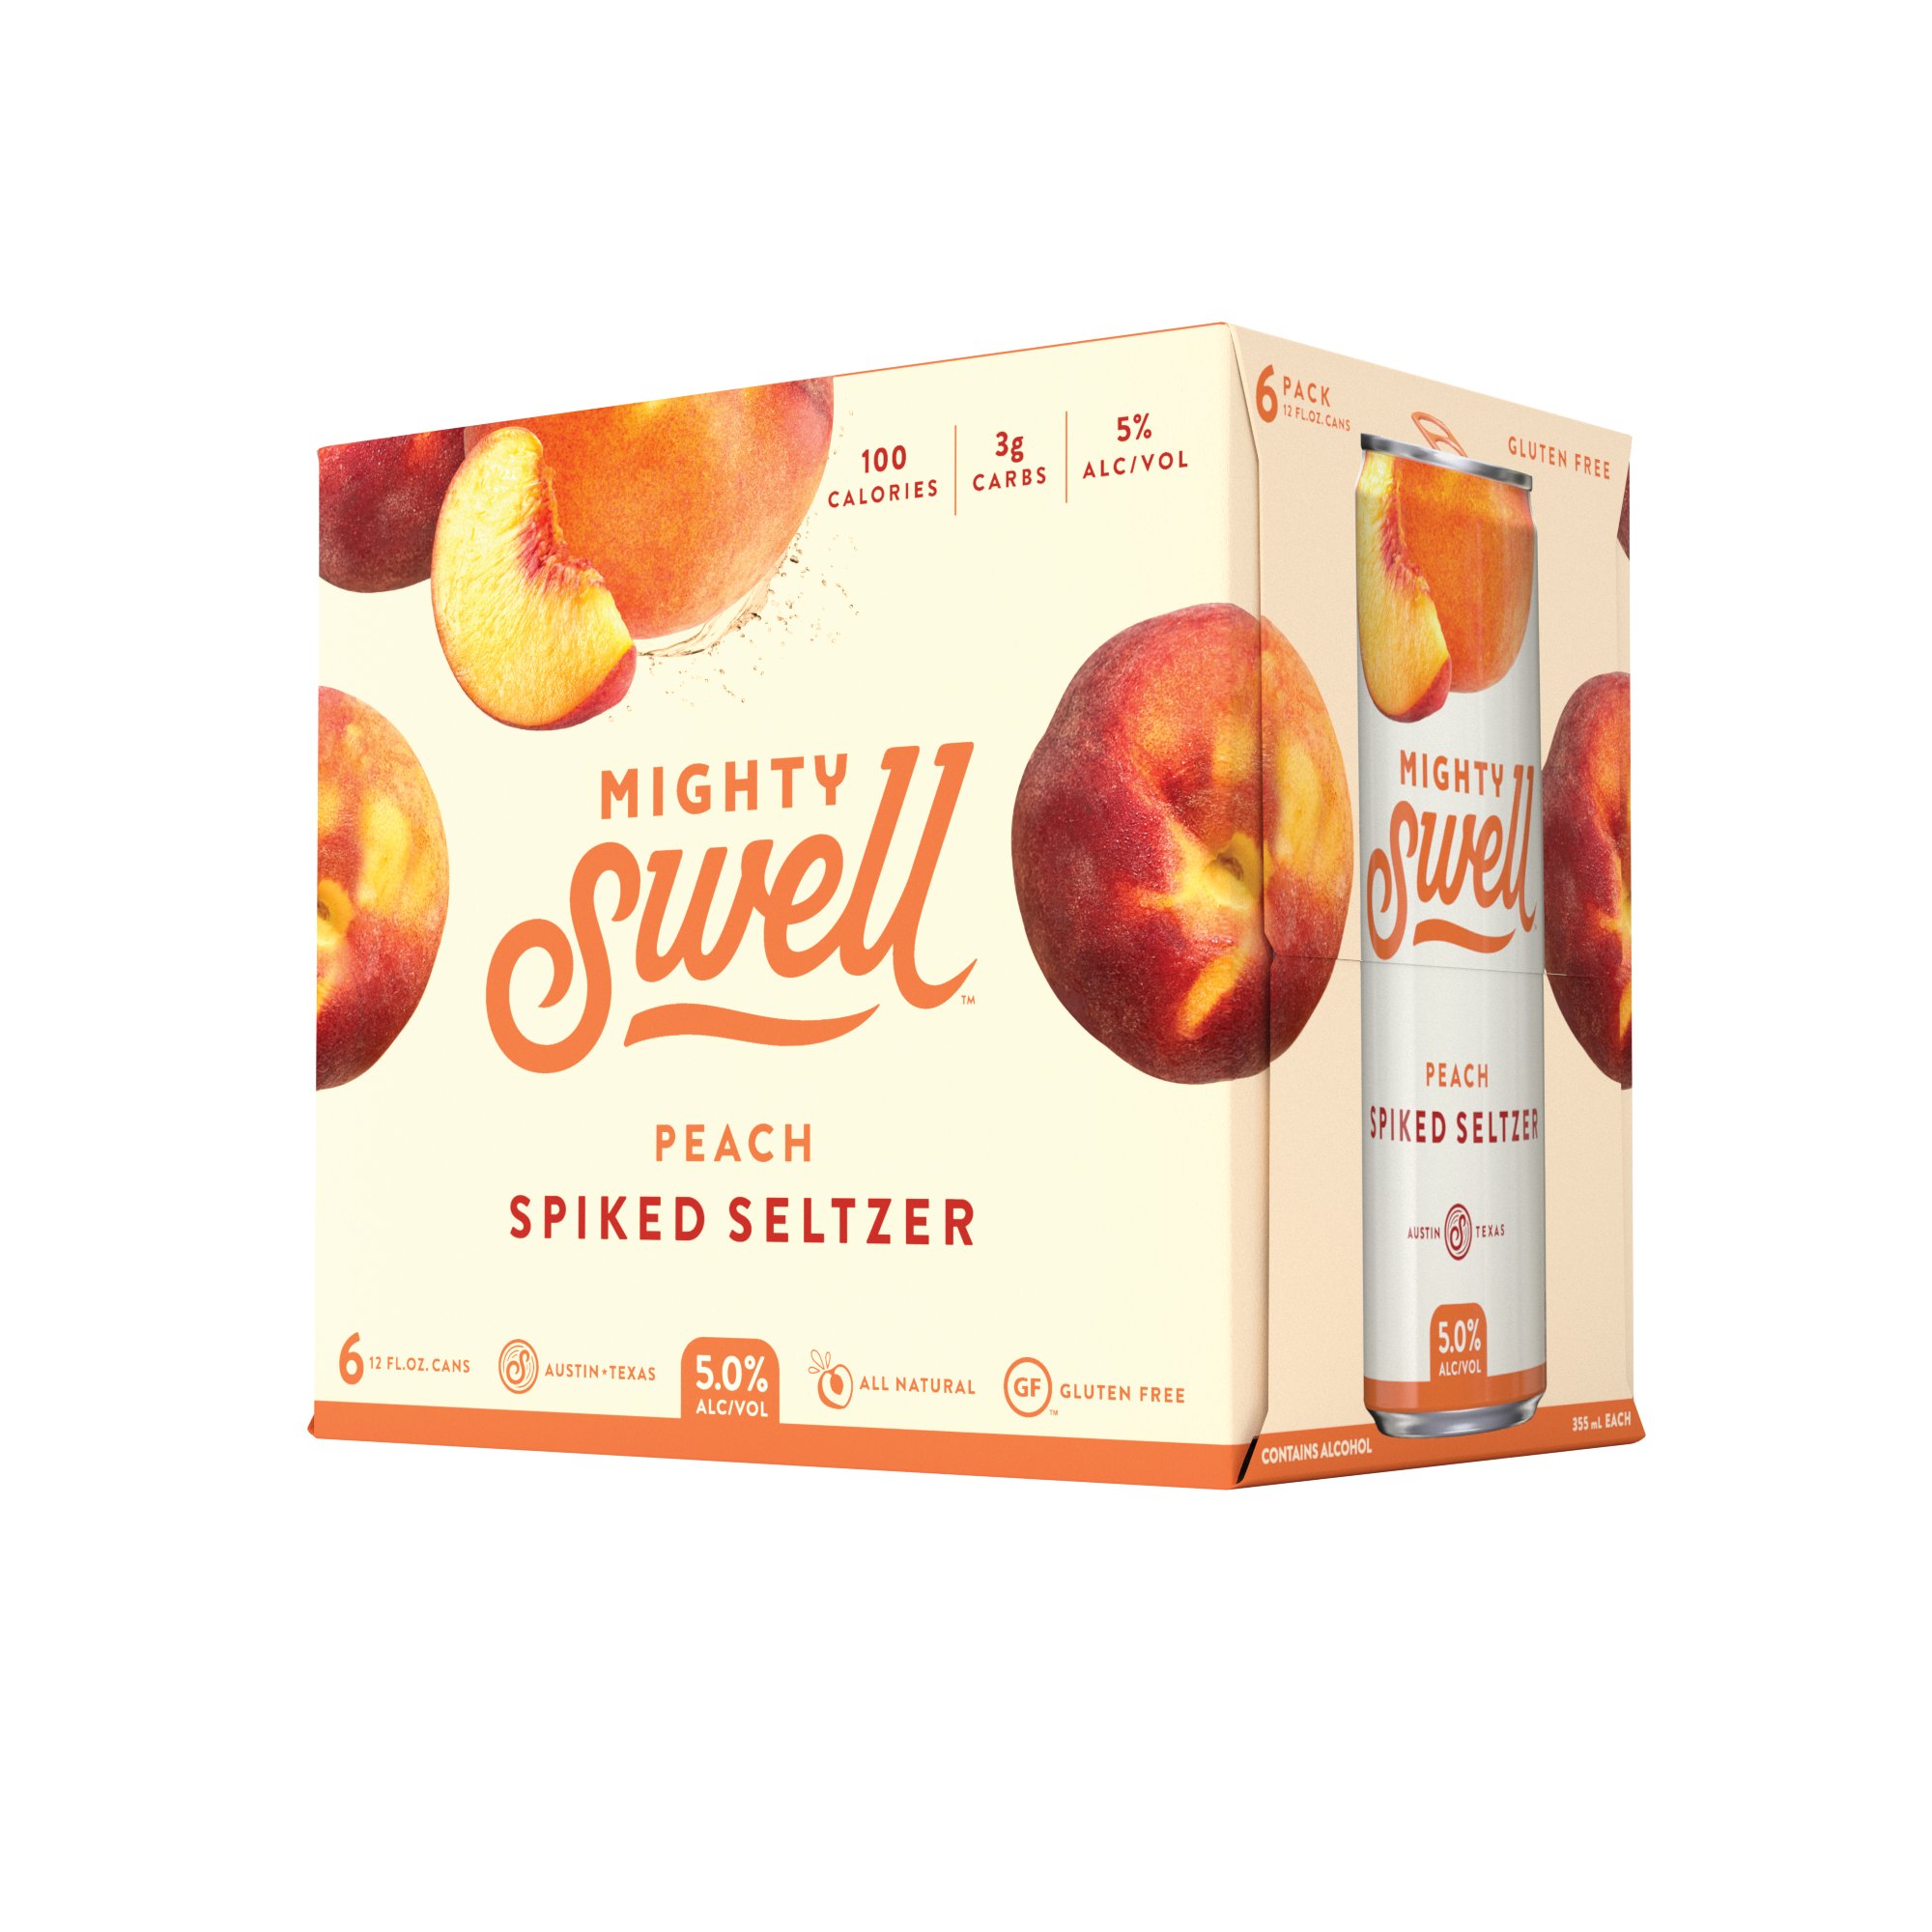 Mighty Swell Spiked Seltzer Variety Pack 12 oz Cans